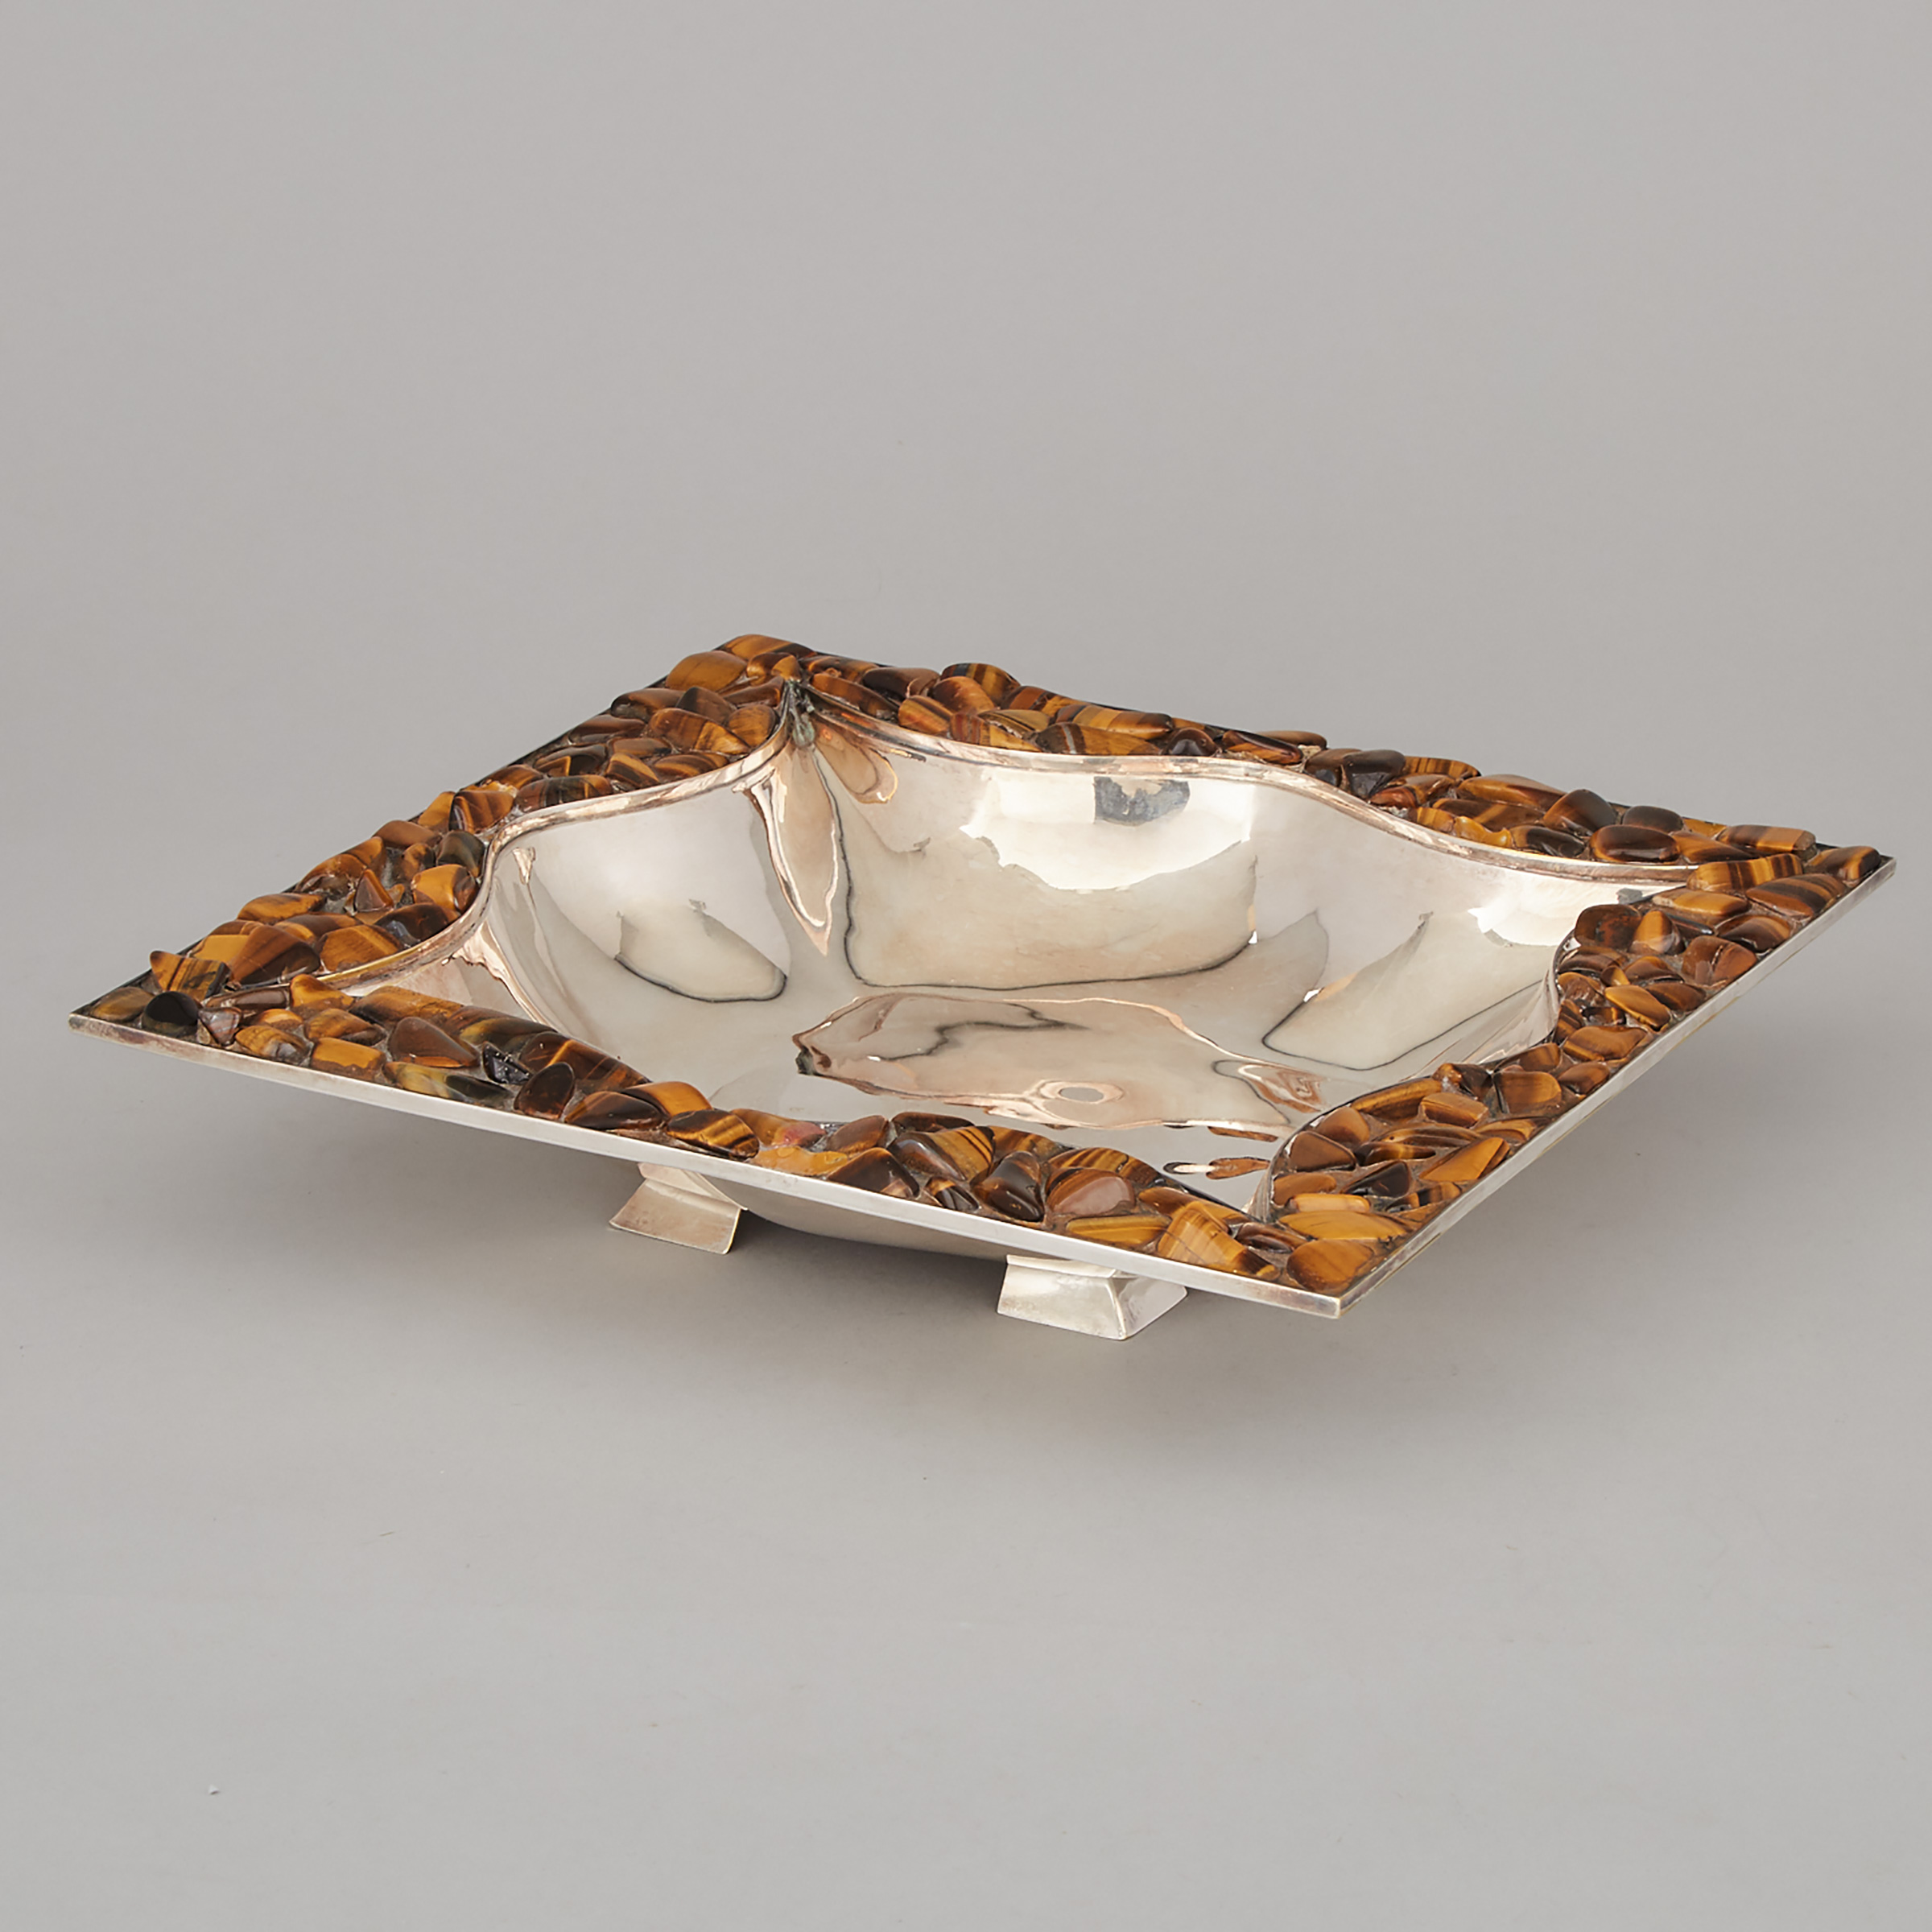 Mexican Silver Plated and Tiger-Eye Centrepiece, Pedro Castillo, Taxco, mid-20th century